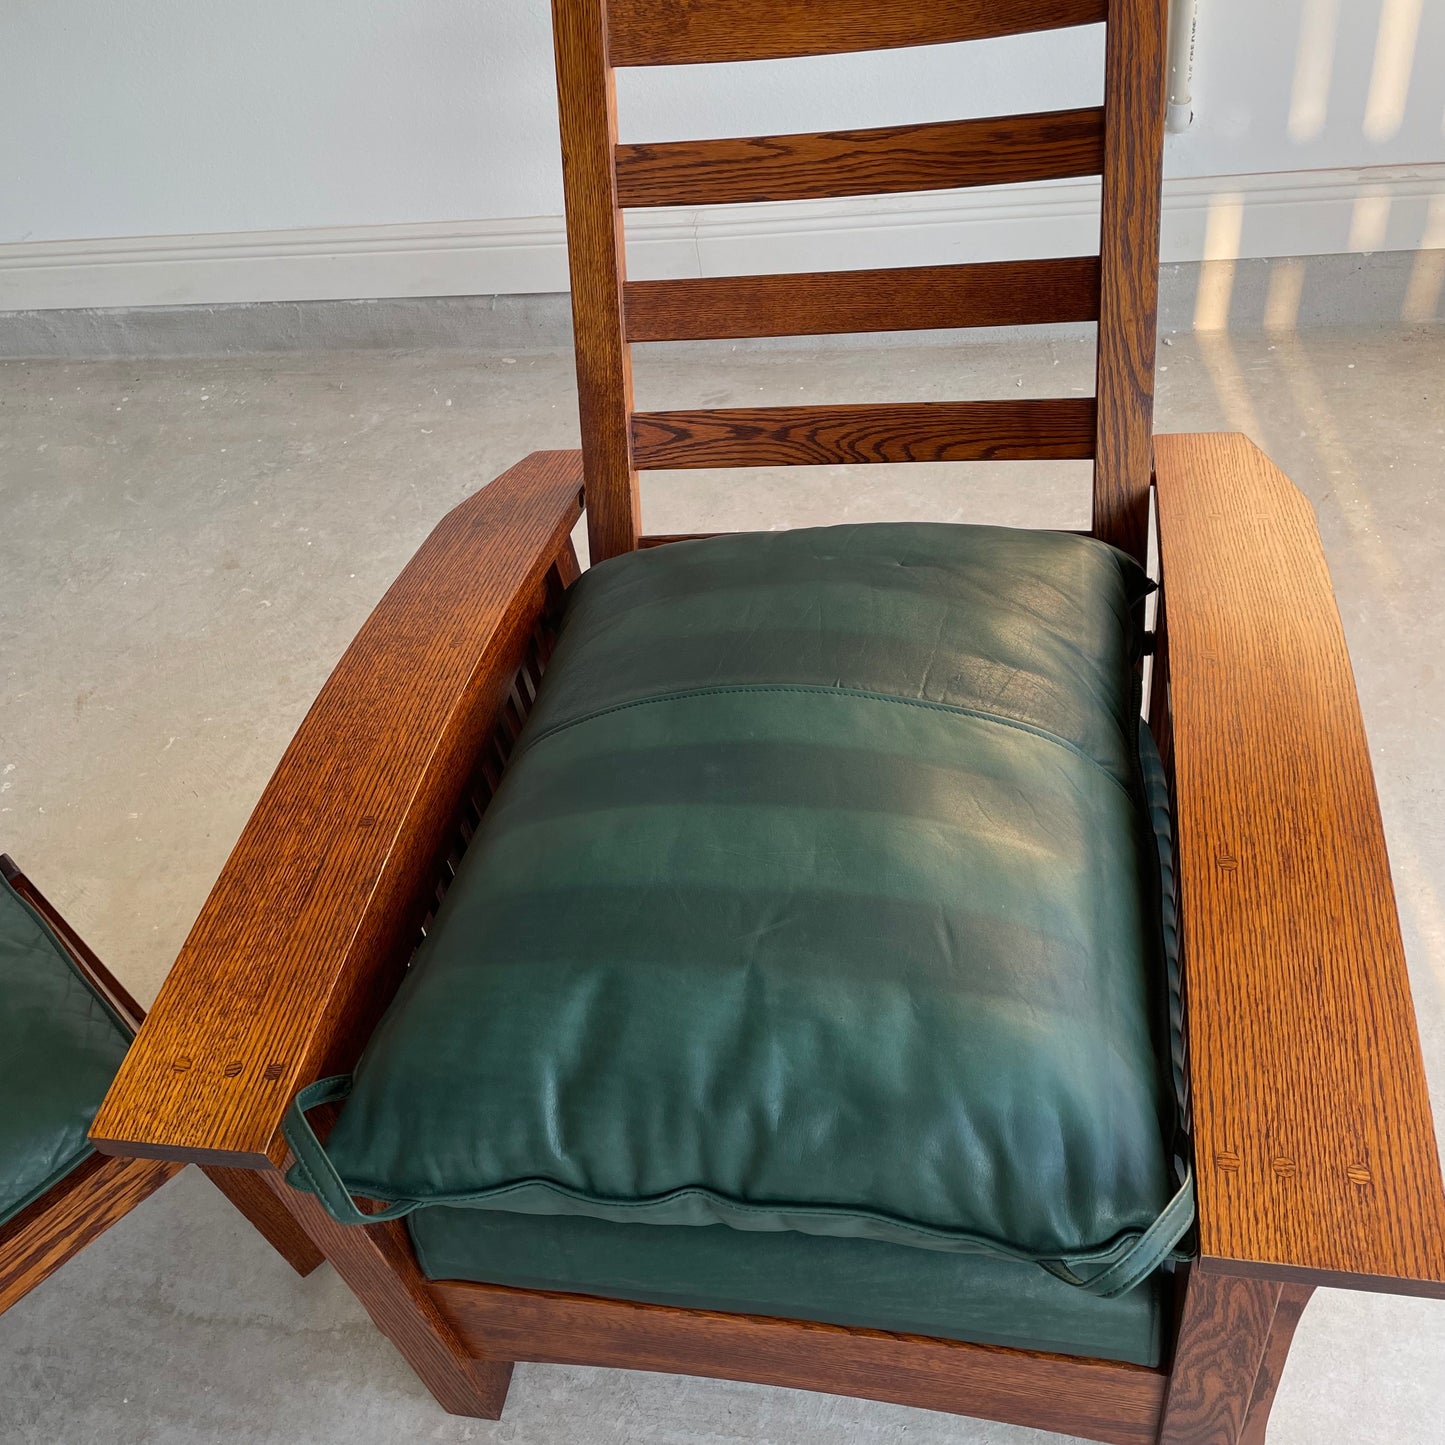 Mission Craftsman Chair + Ottoman: See Shipping Rules